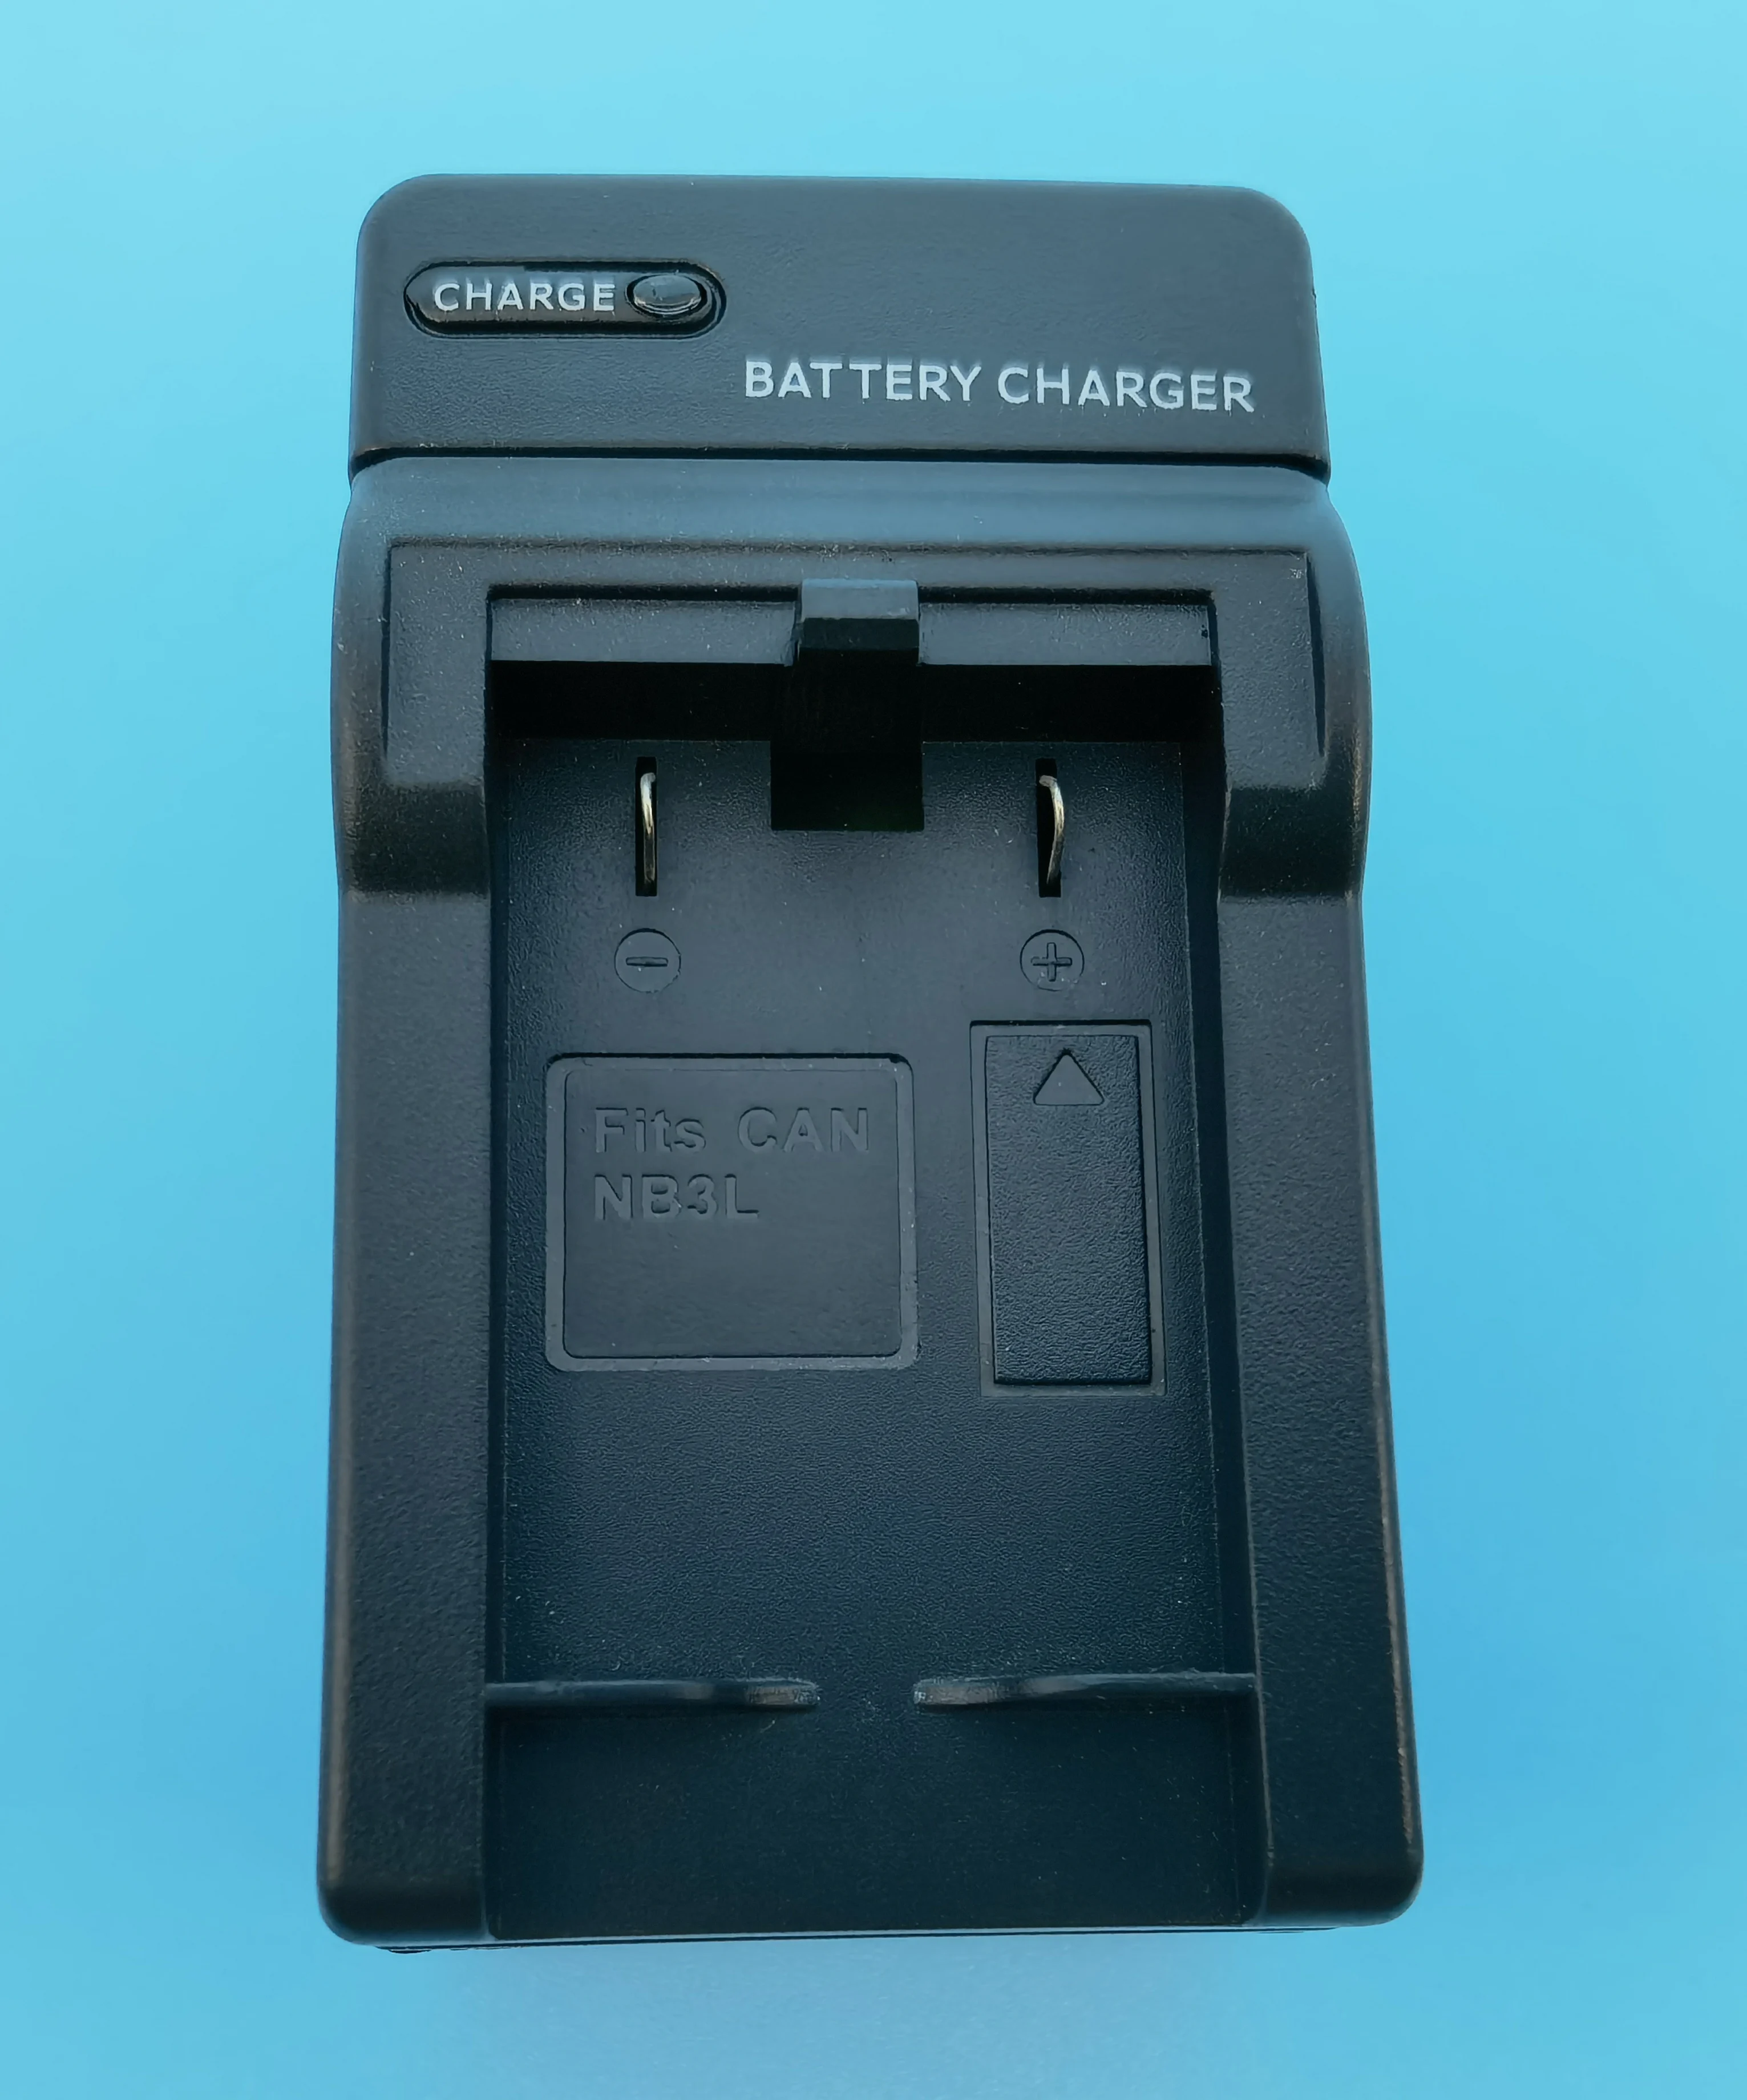 

NB-3L Battery Charger for Canon Digital IXUS 600 700 750 IXUS I IXUS II I2 I5 SD100 SD10 SD20 SD110 SD500 SD550 camera